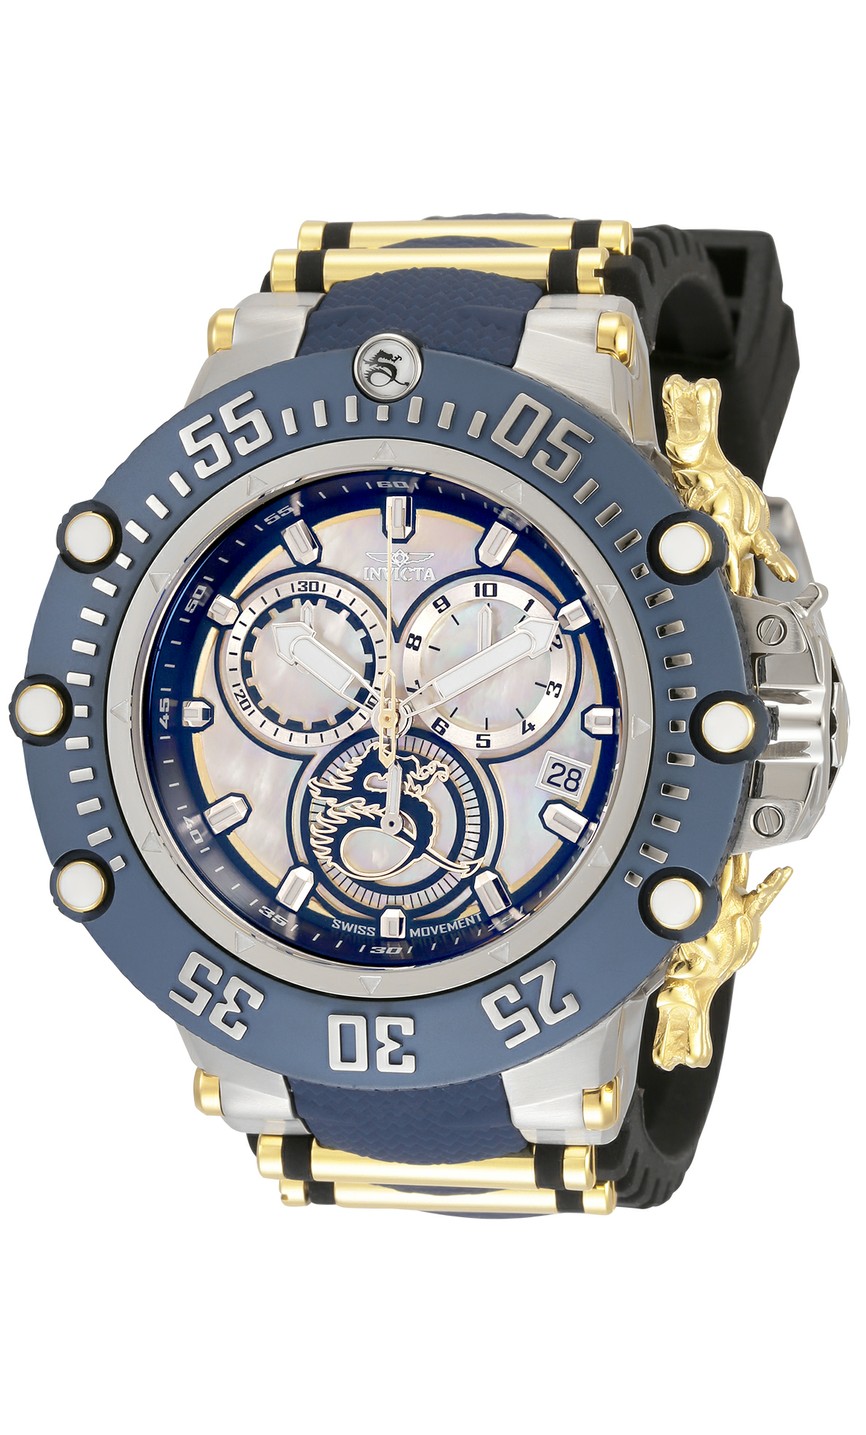 Invicta Subaqua Men's Watch - 52mm Stainless Steel Case, Silicone/SS Band, Black, Blue, Gold (33647)